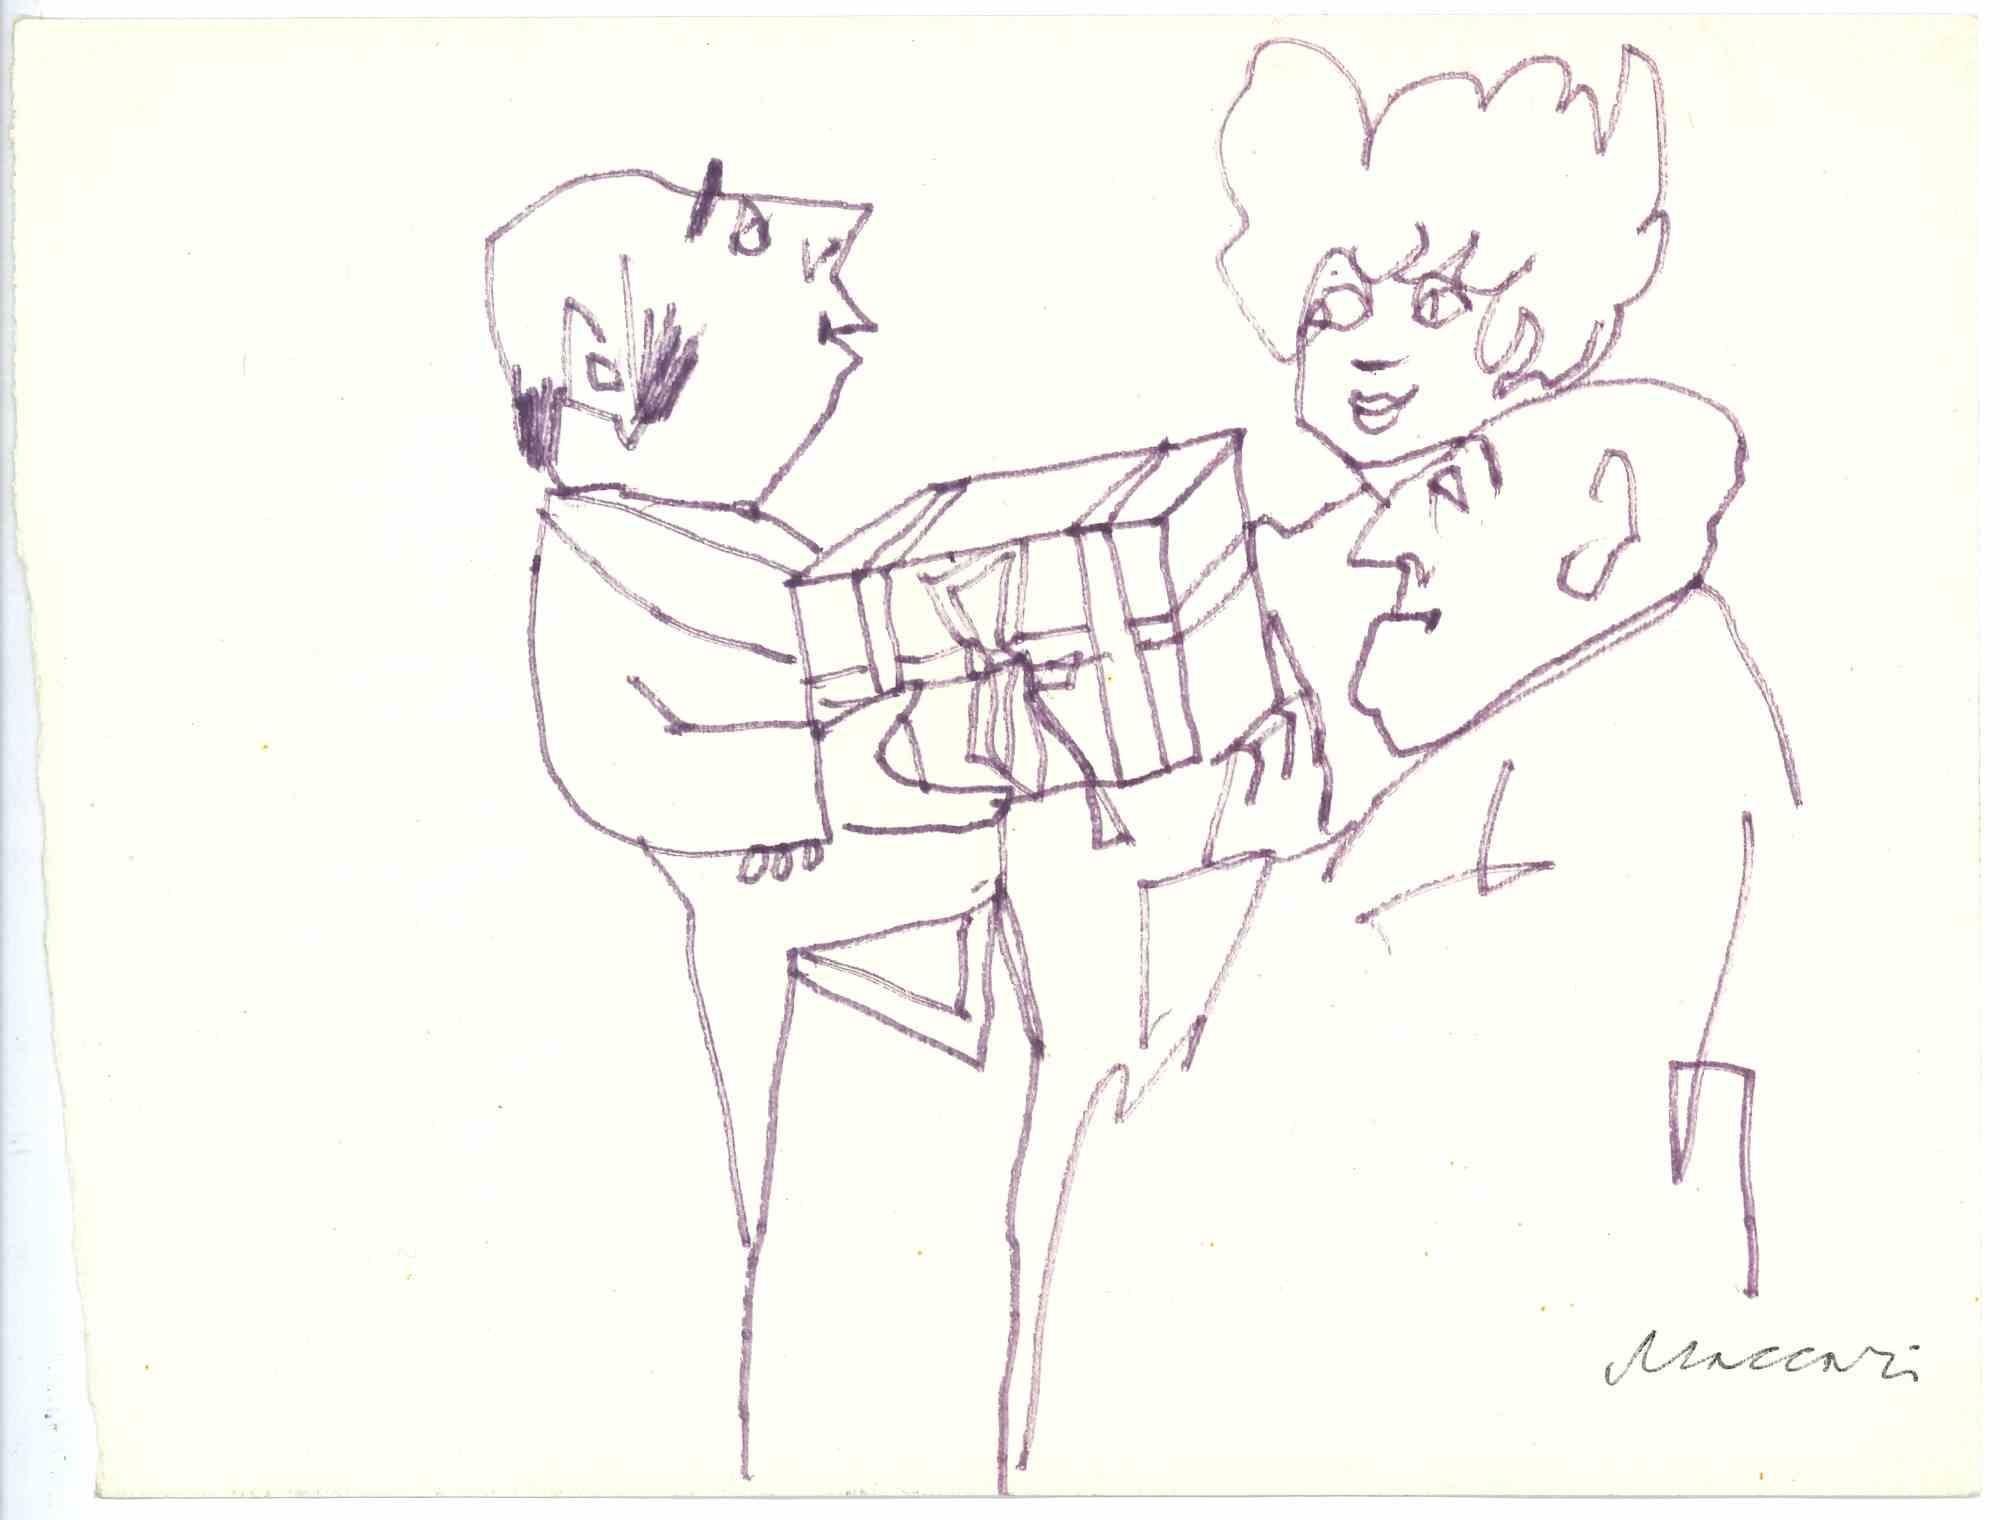 The Gift is a Violet Marker Drawing realized by Mino Maccari  (1924-1989) in the Mid-20th Century.

Hand-signed on the lower.

Good conditions.

Mino Maccari (Siena, 1924-Rome, June 16, 1989) was an Italian writer, painter, engraver and journalist,